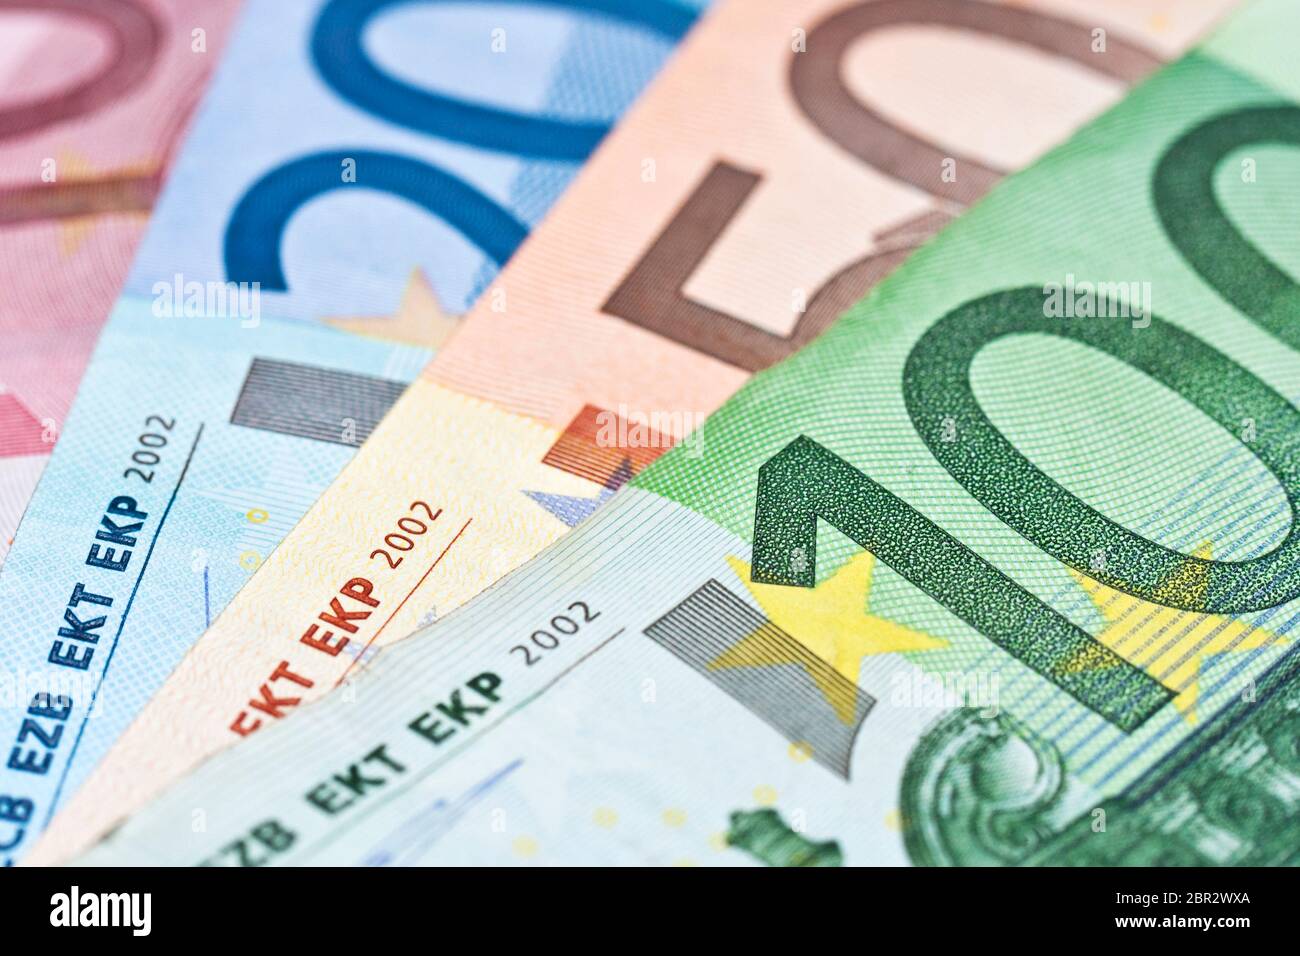 Close up of various euros banknotes, colorful money background, european currency cash concept Stock Photo